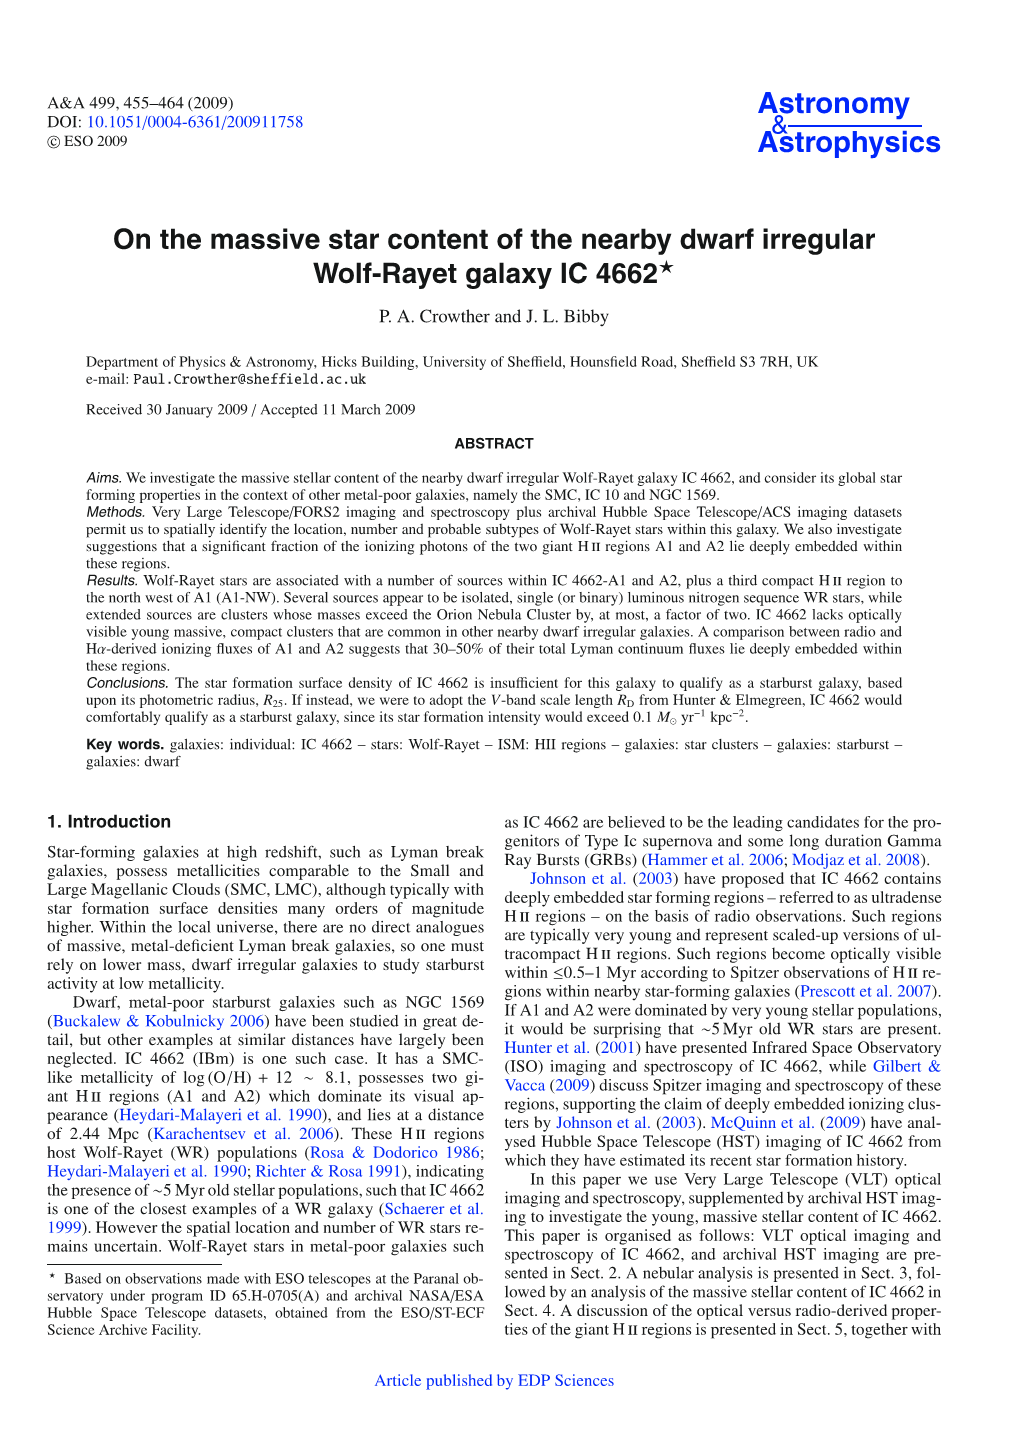 On the Massive Star Content of the Nearby Dwarf Irregular Wolf-Rayet Galaxy IC 4662